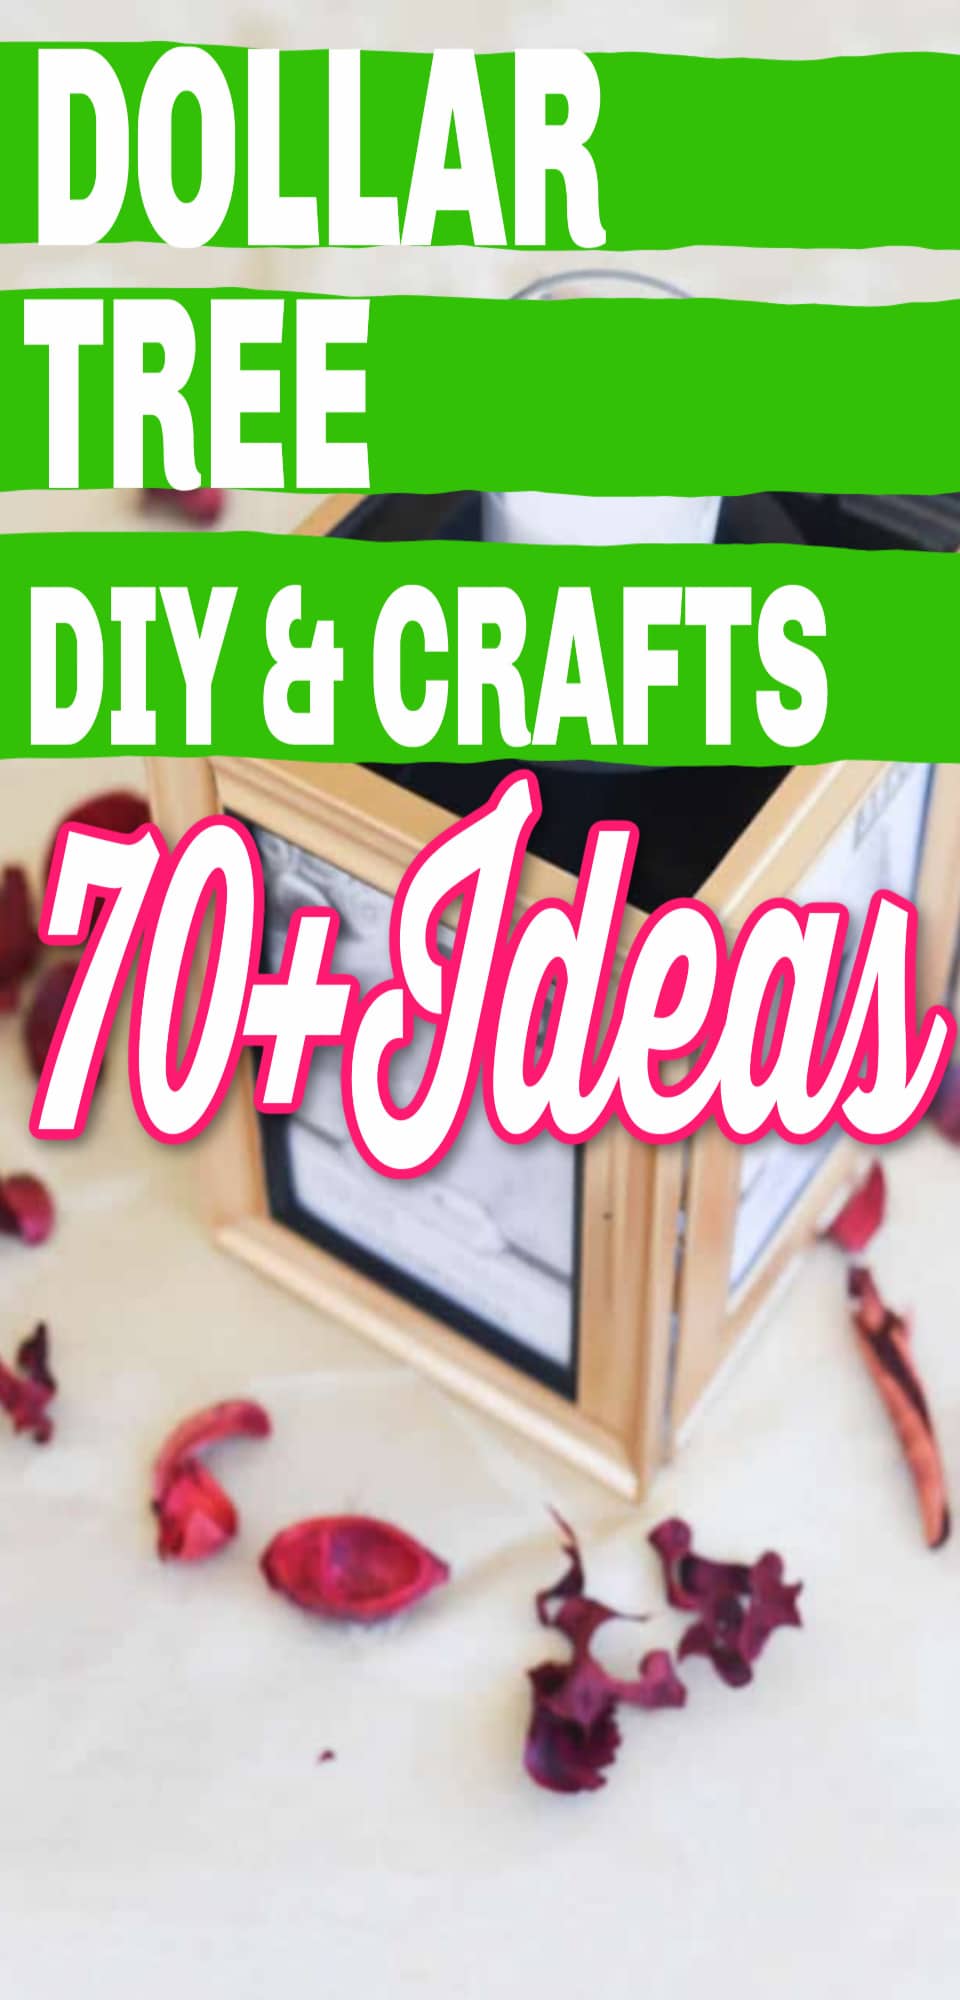 70 Easy DIY Crafts - Fun Craft Ideas and Projects